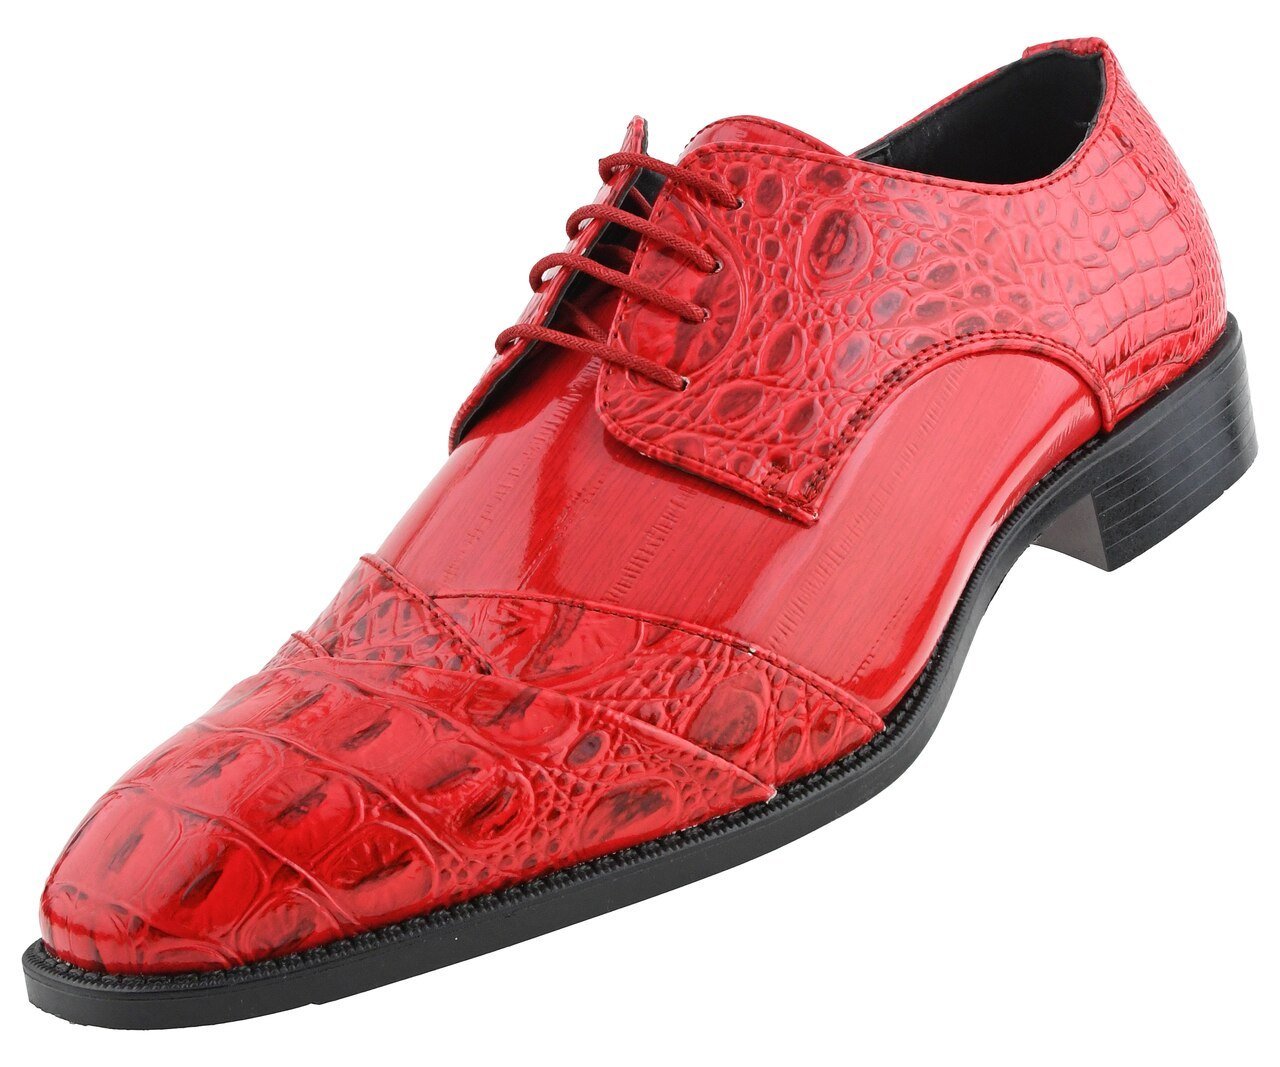 red dress shoes mens